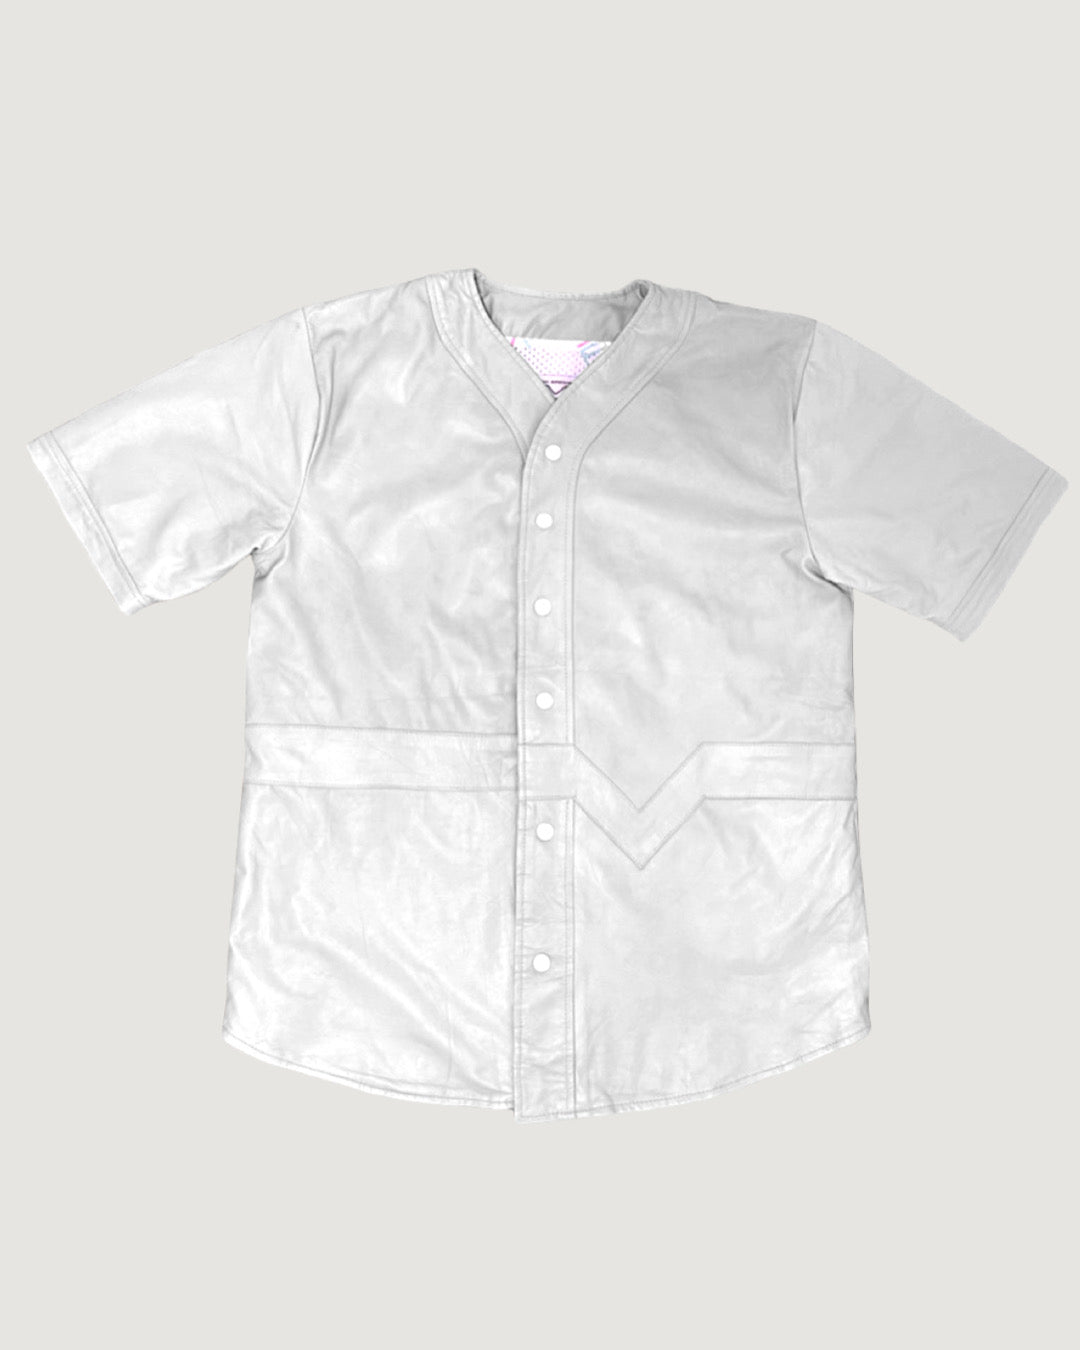 Leather Court Jersey (White)